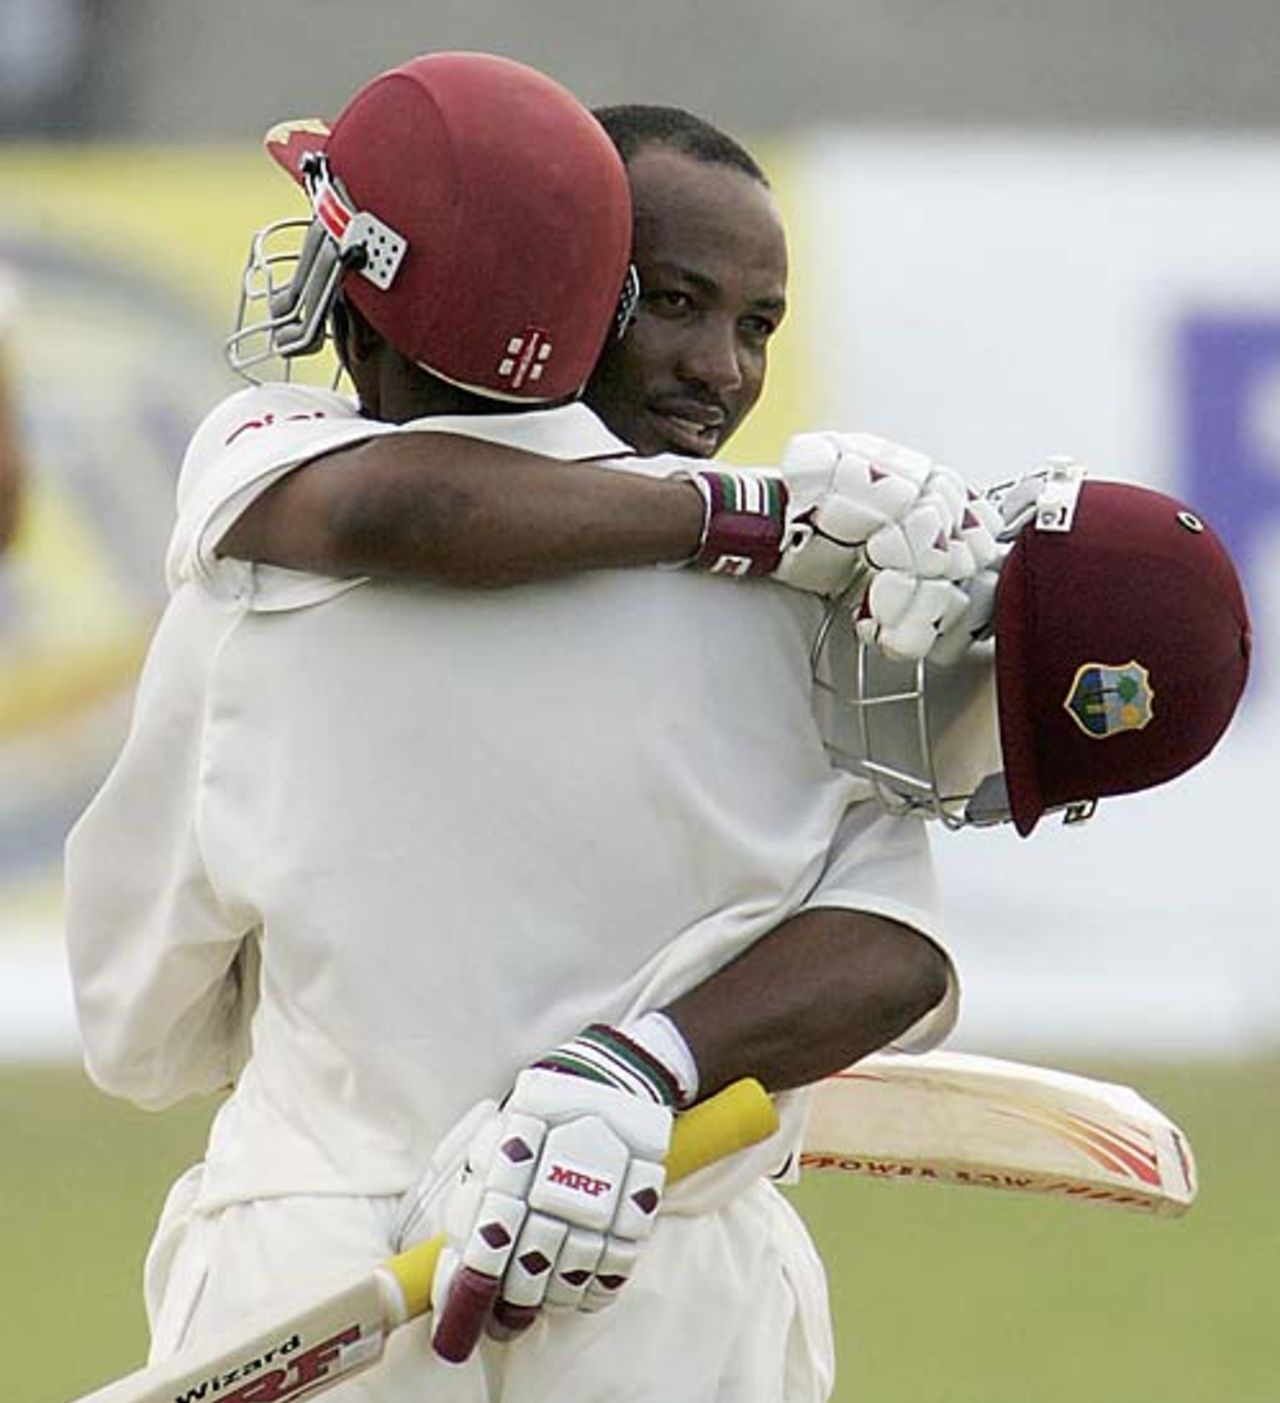 A hug for Brian Lara as he celebrates his comeback hundred, West Indies v South Africa, Trinidad, 2nd Test, April 8, 2005